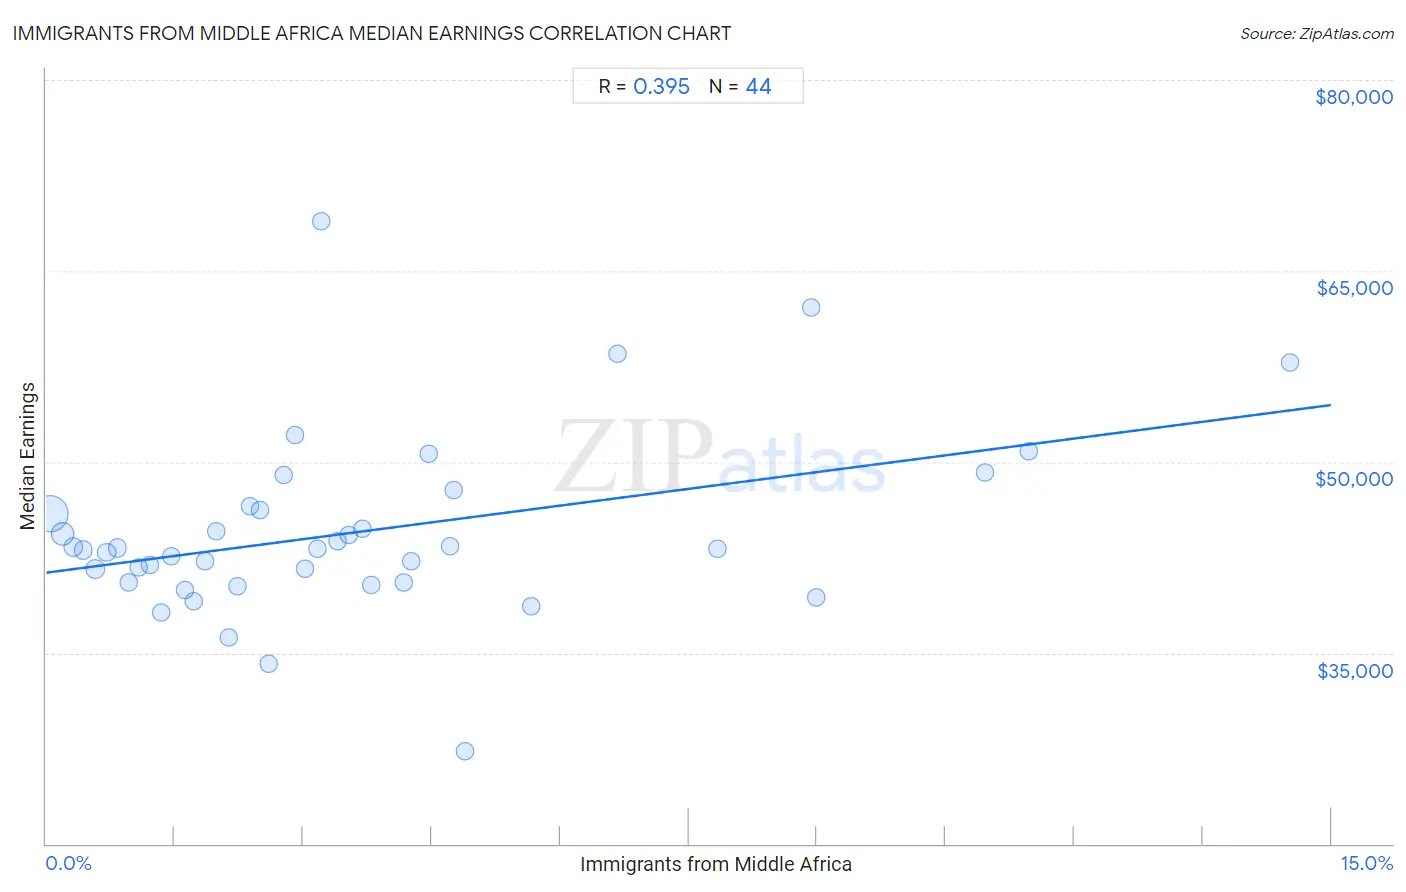 Immigrants from Middle Africa Median Earnings